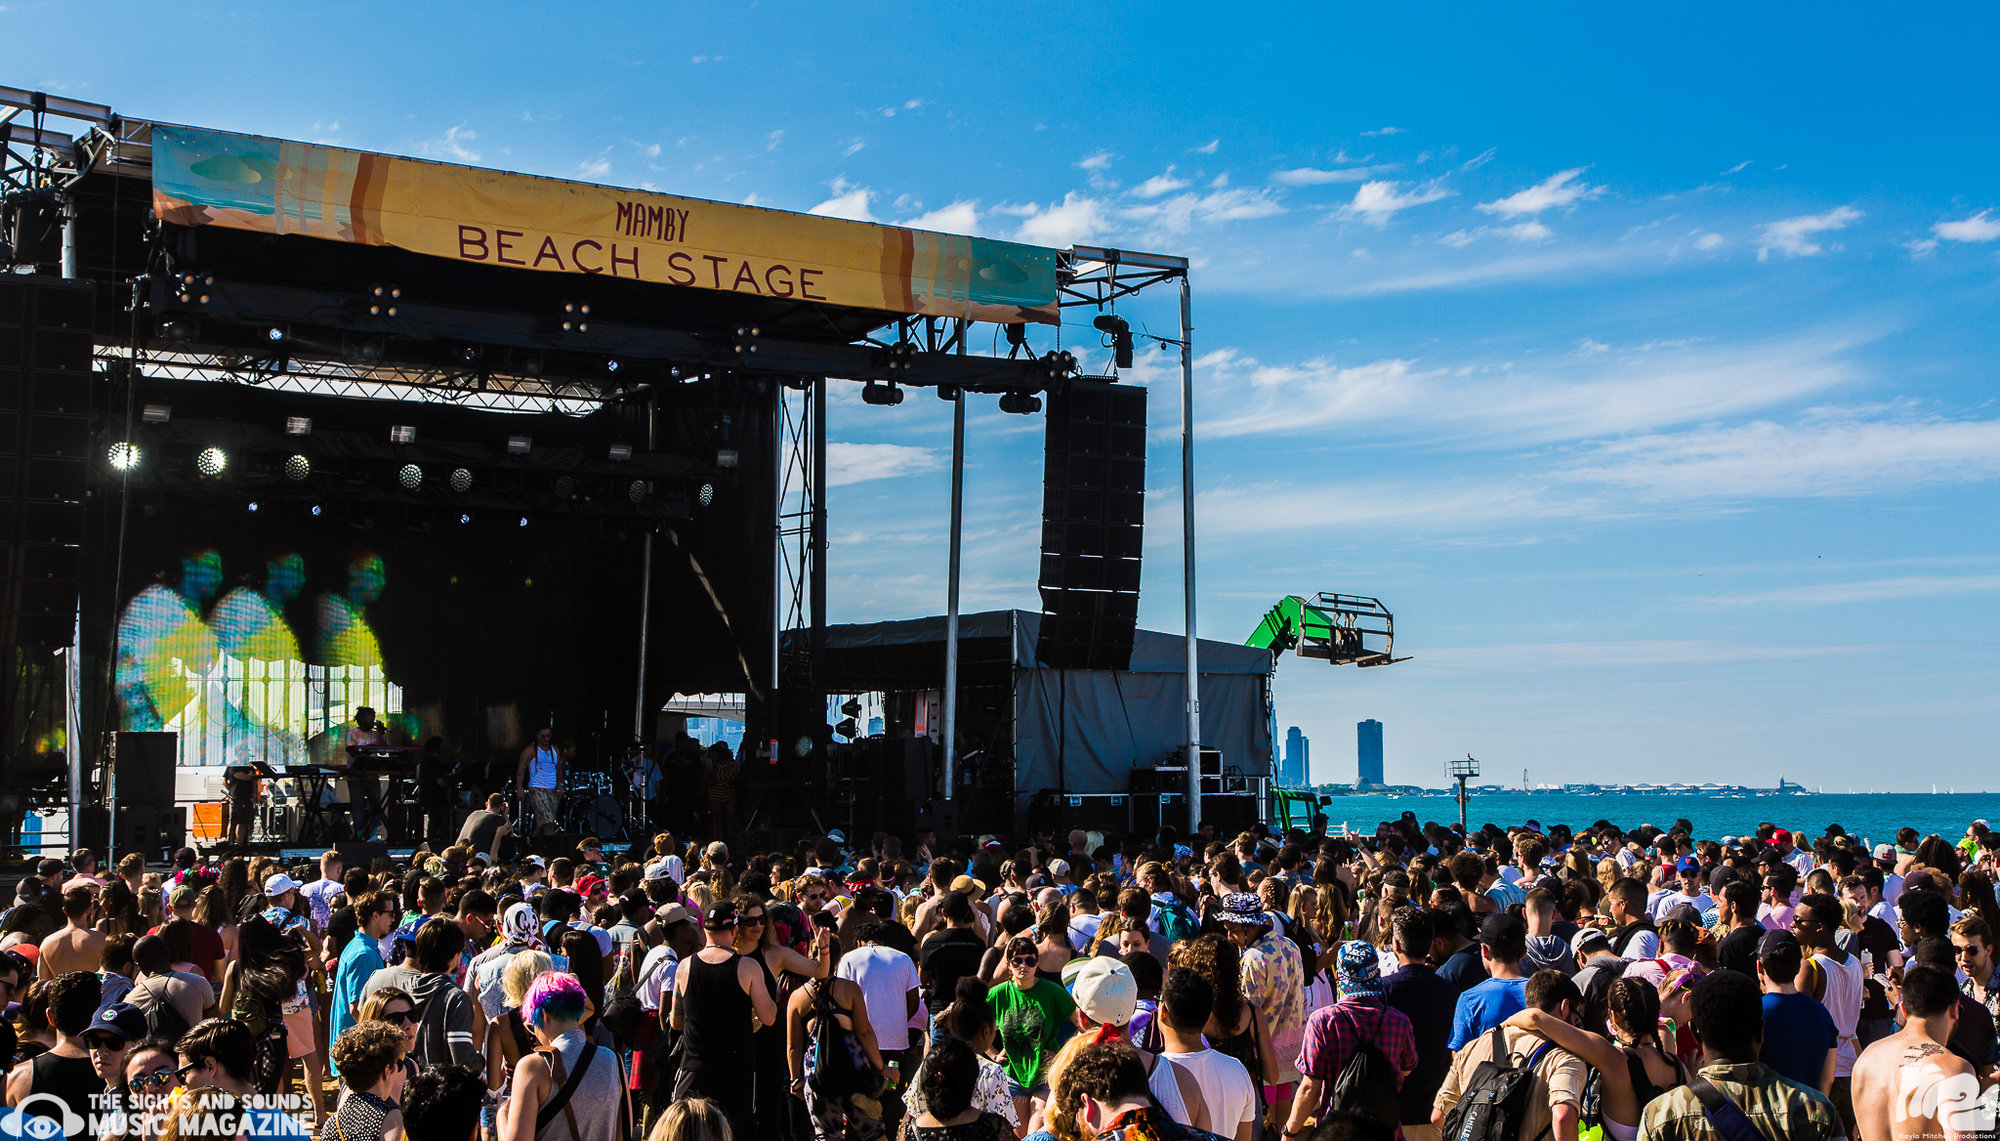 Mamby On The Beach Brings the Heat to New Venue The Sights And Sounds